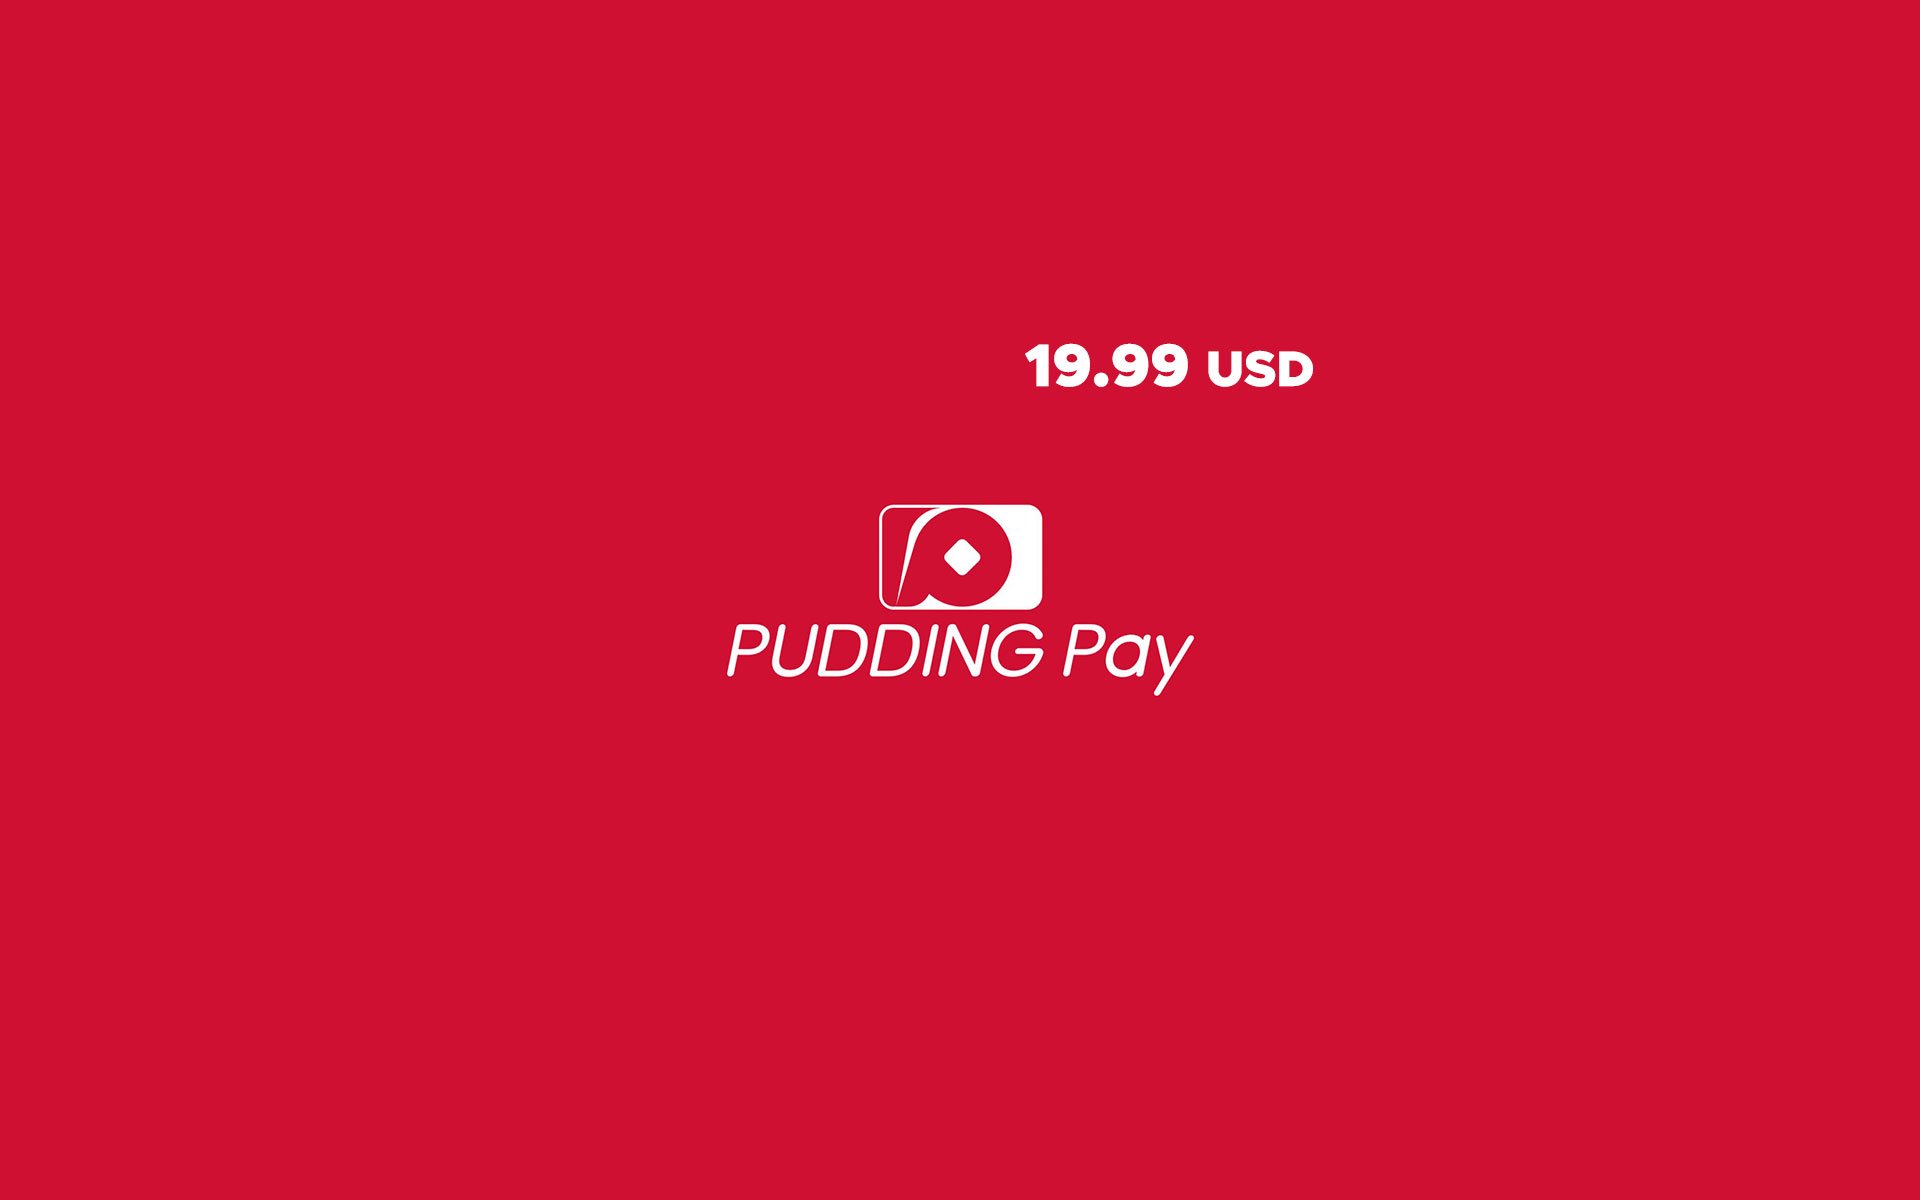 19.99 USD Pudding Pay cover